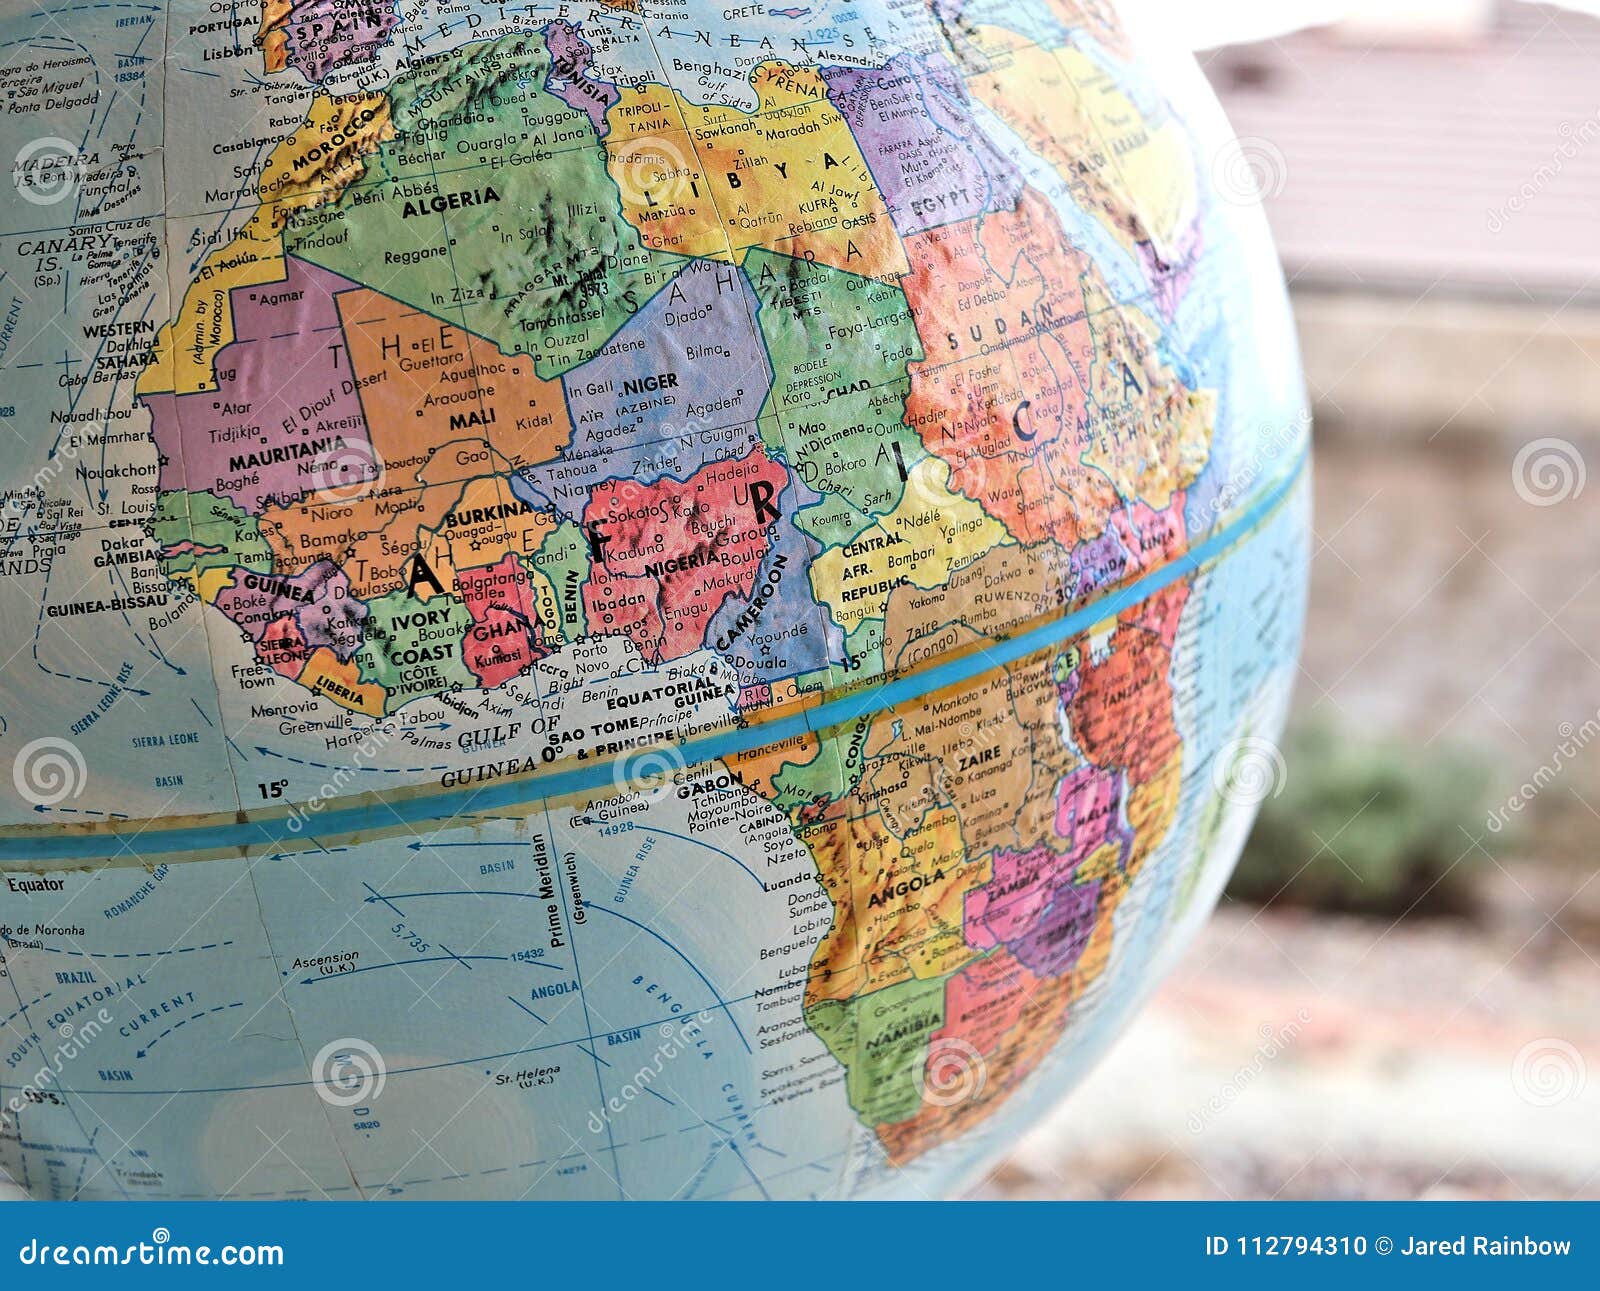 african continent focus macro shot on globe map for travel blogs, social media, website banners and backgrounds.